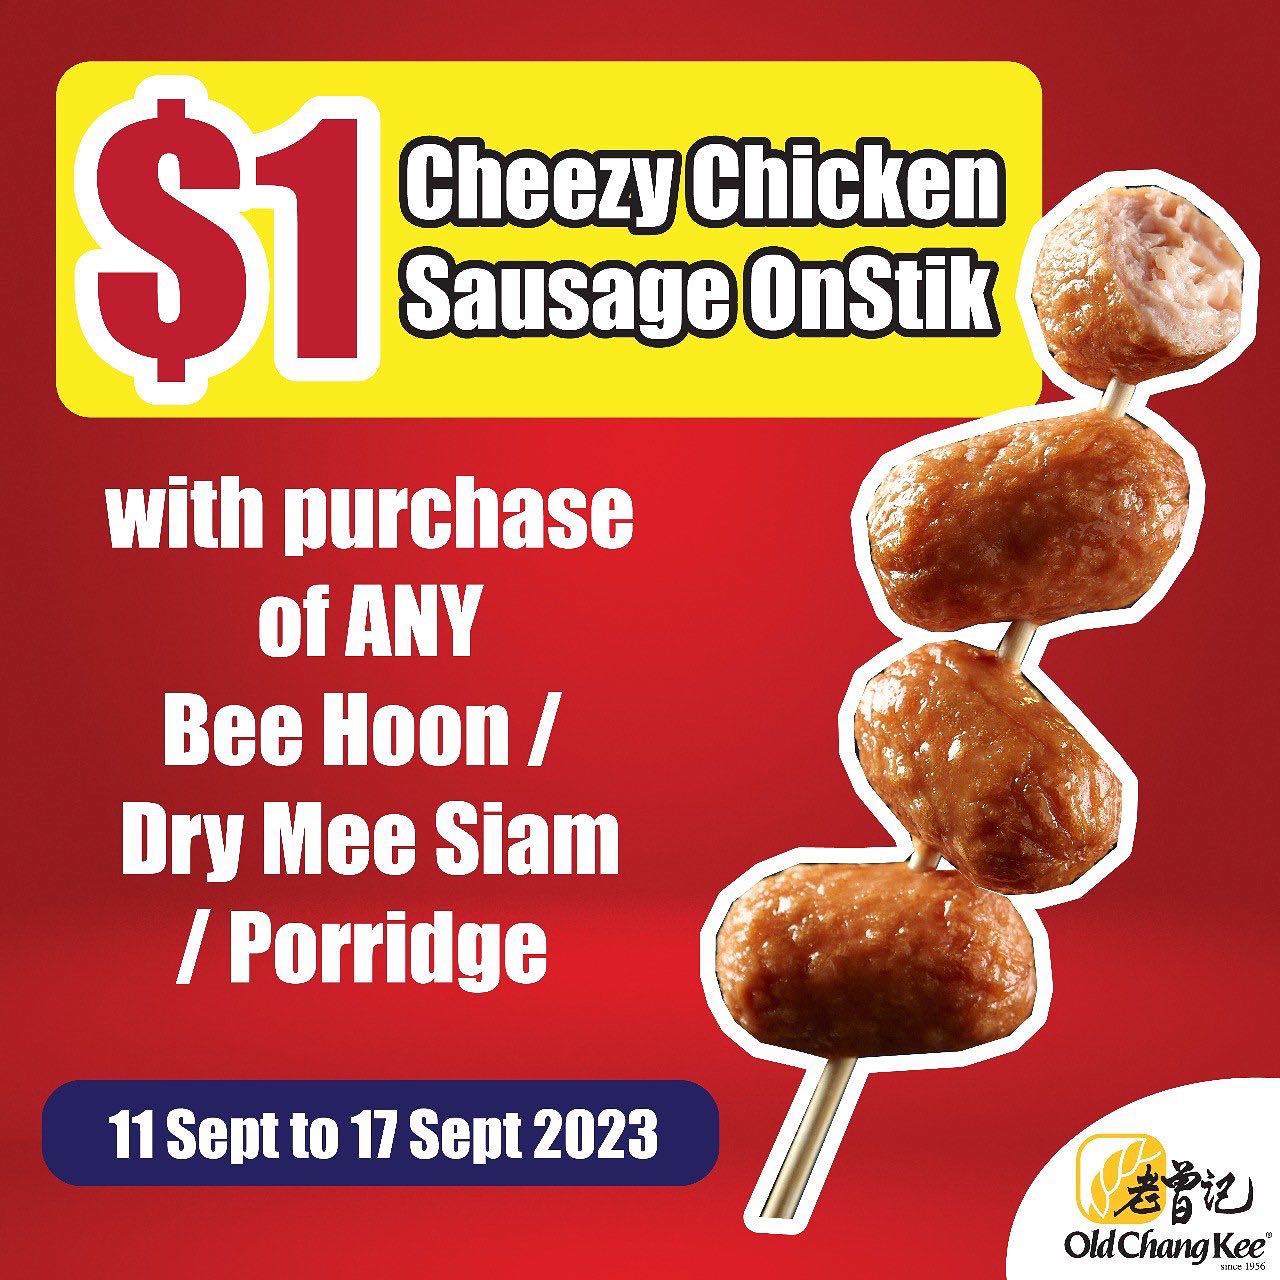 Old chang kee S$1 deal